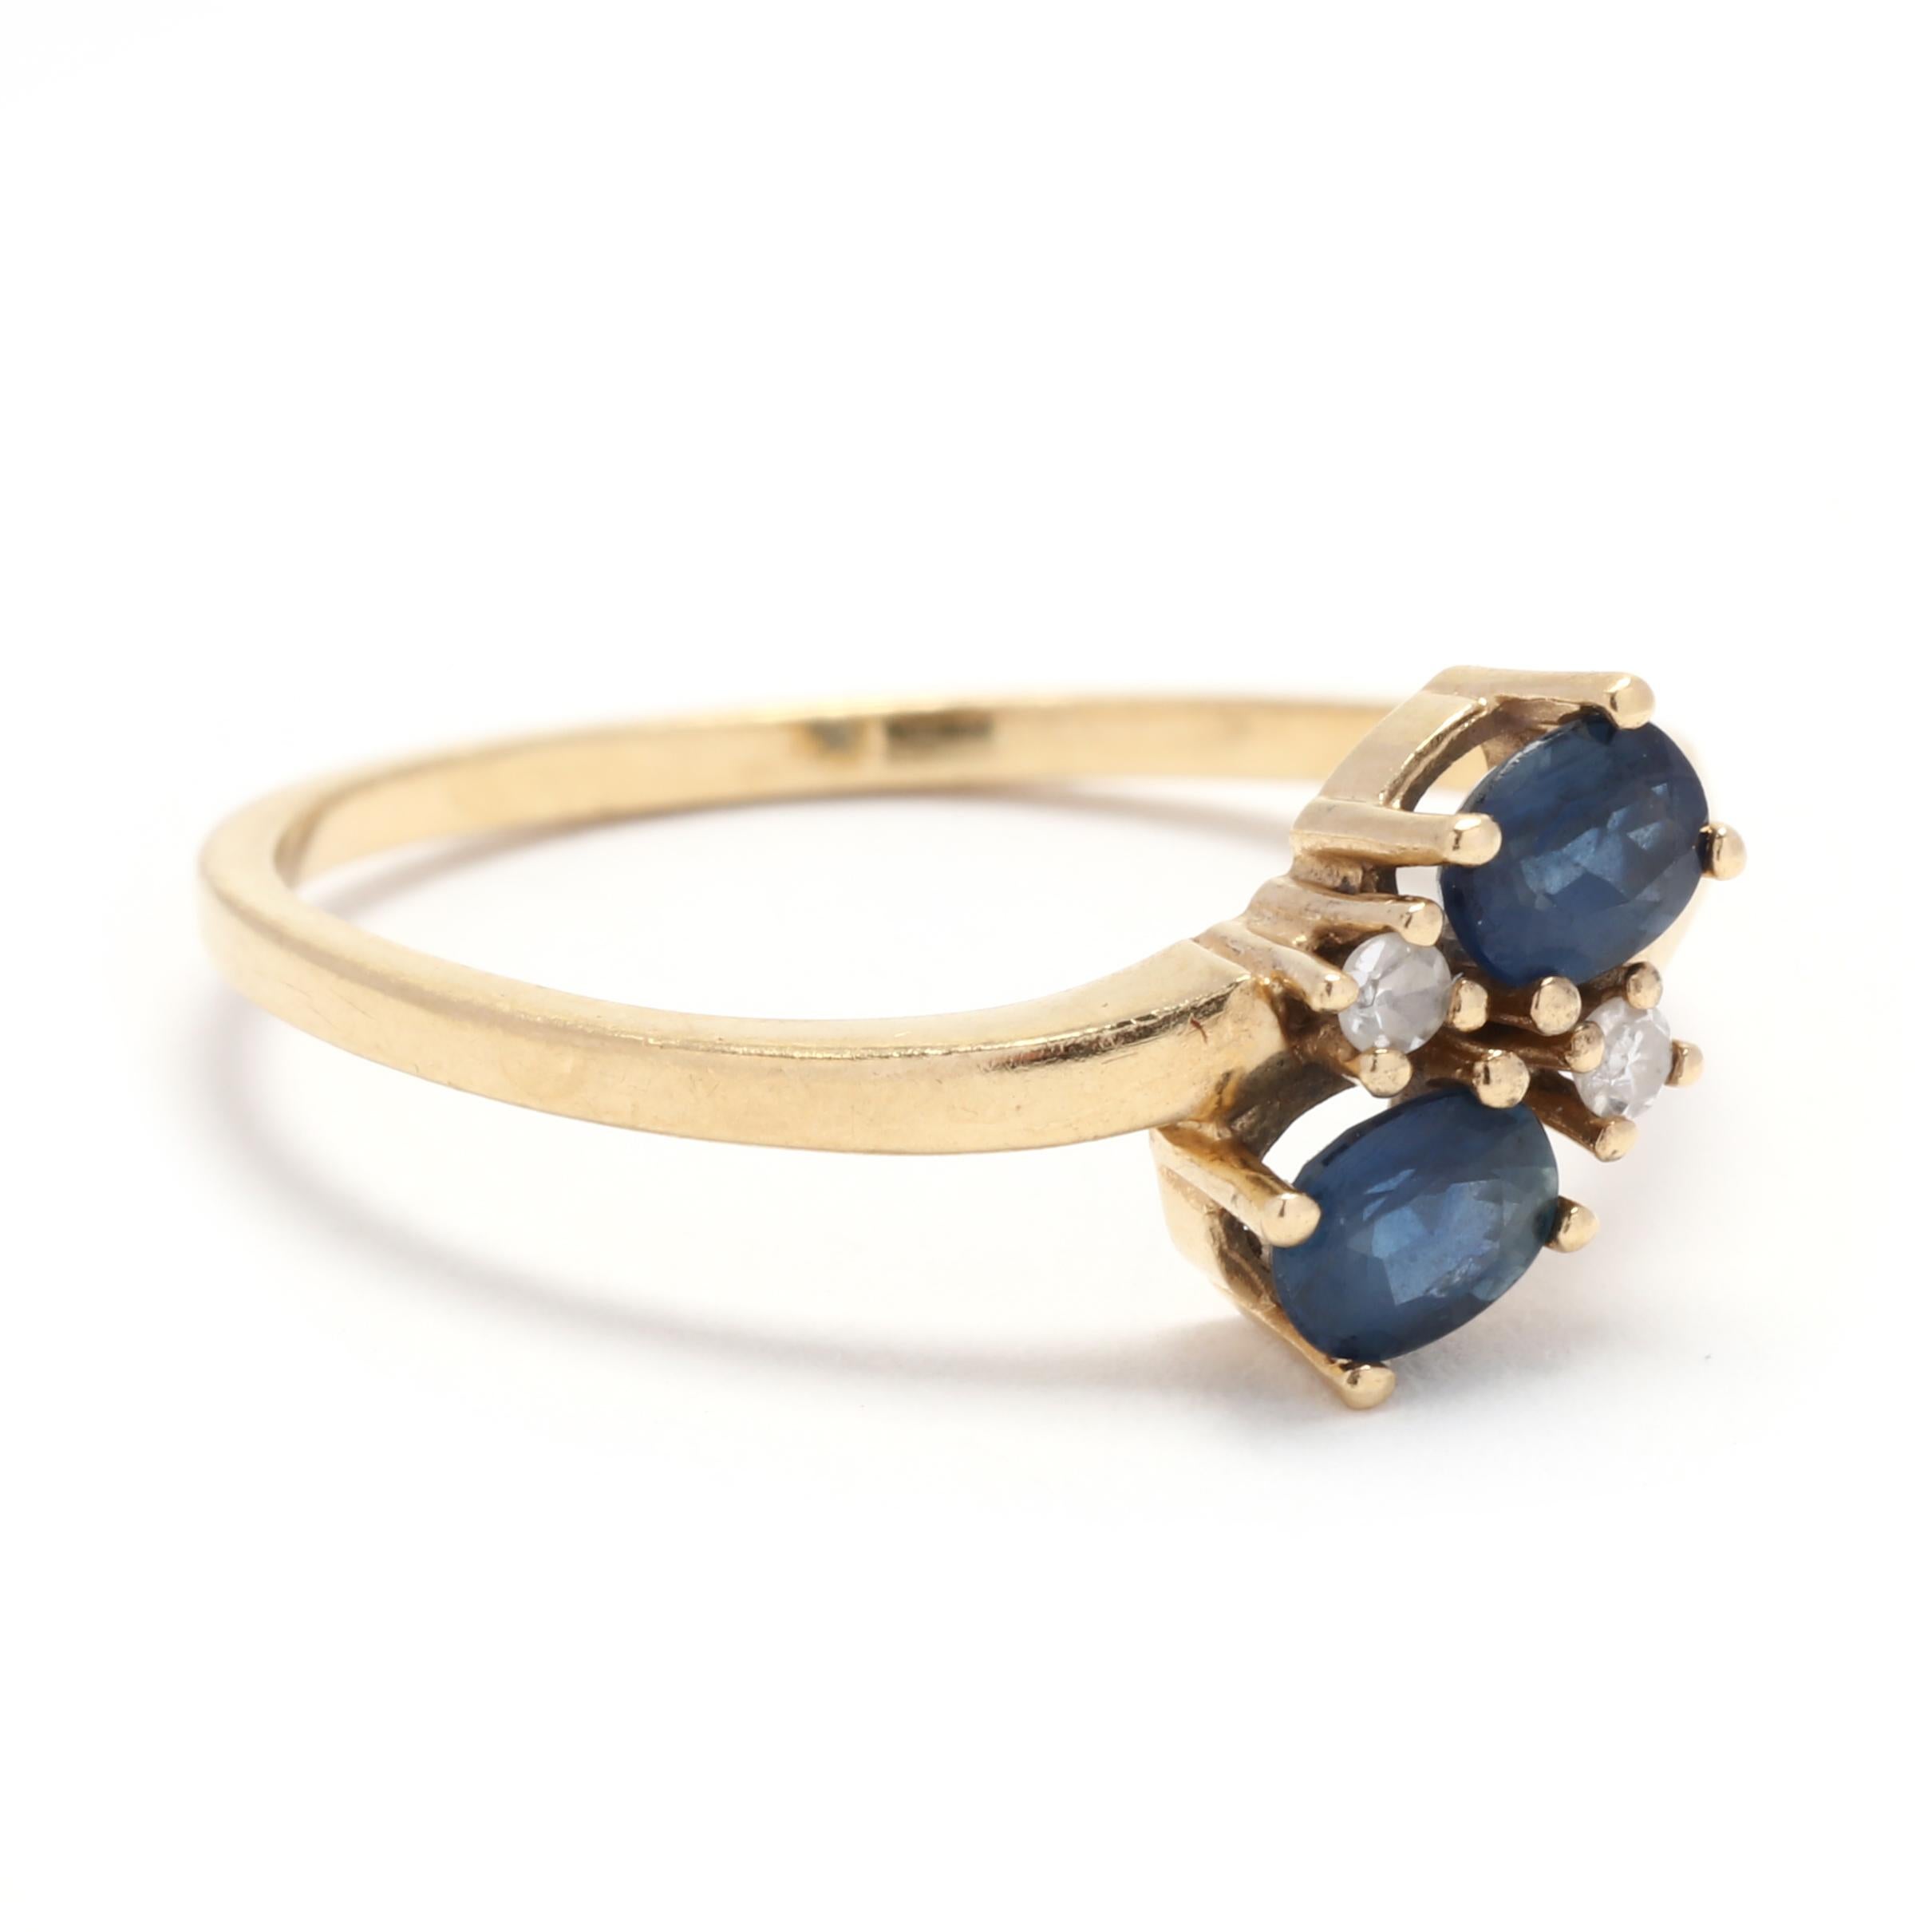 This elegant and simple toi et moi ring features two beautiful gemstones - a 0.54ctw round sapphire and a round diamond, both set in 18k yellow gold. The contrast between the deep blue sapphire and the sparkling diamond creates a mesmerizing and